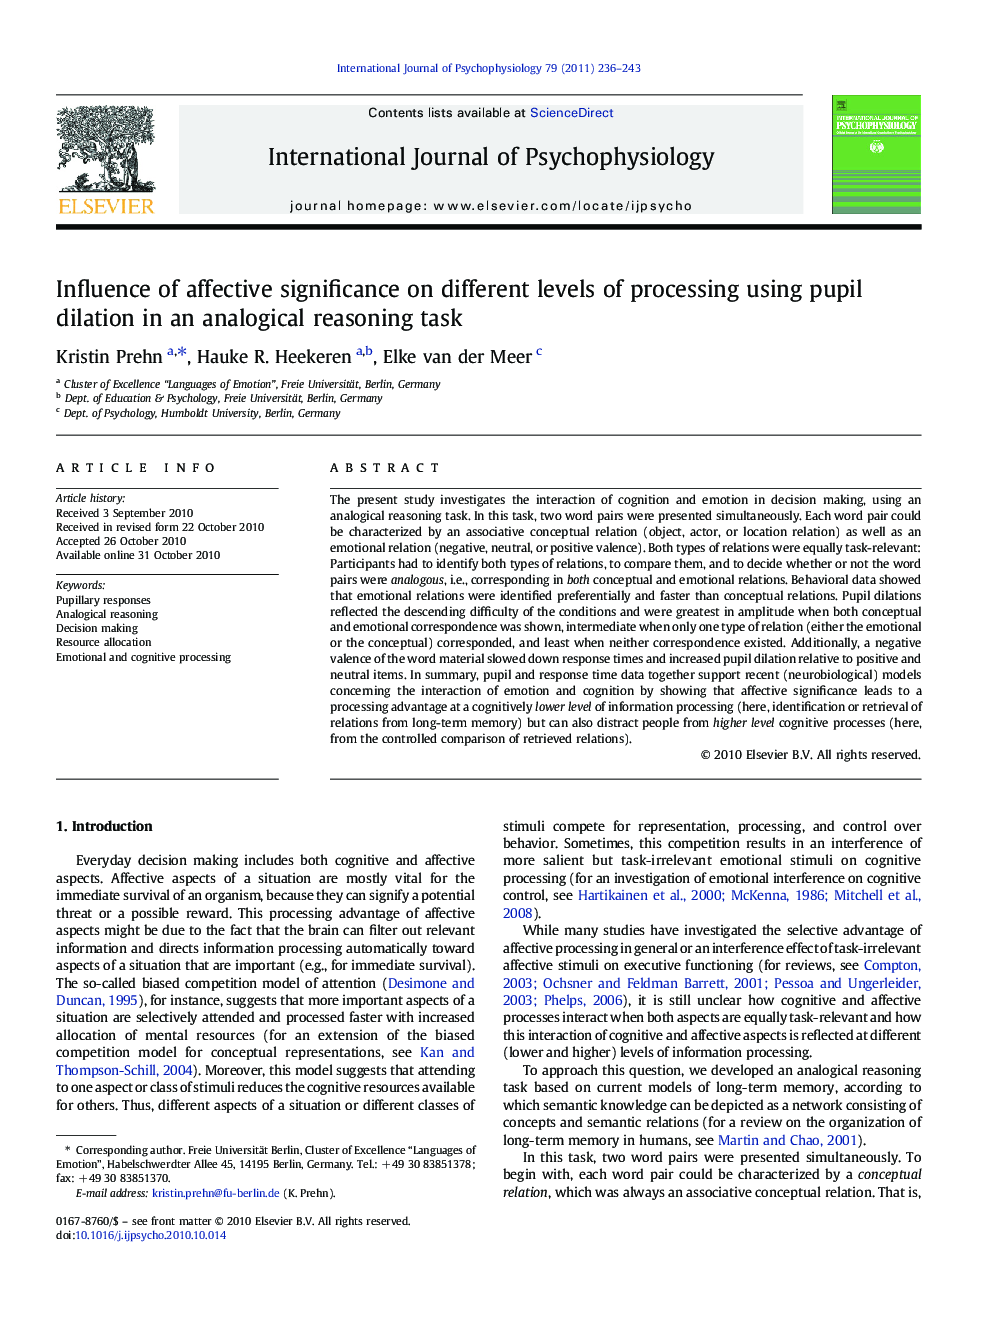 Influence of affective significance on different levels of processing using pupil dilation in an analogical reasoning task